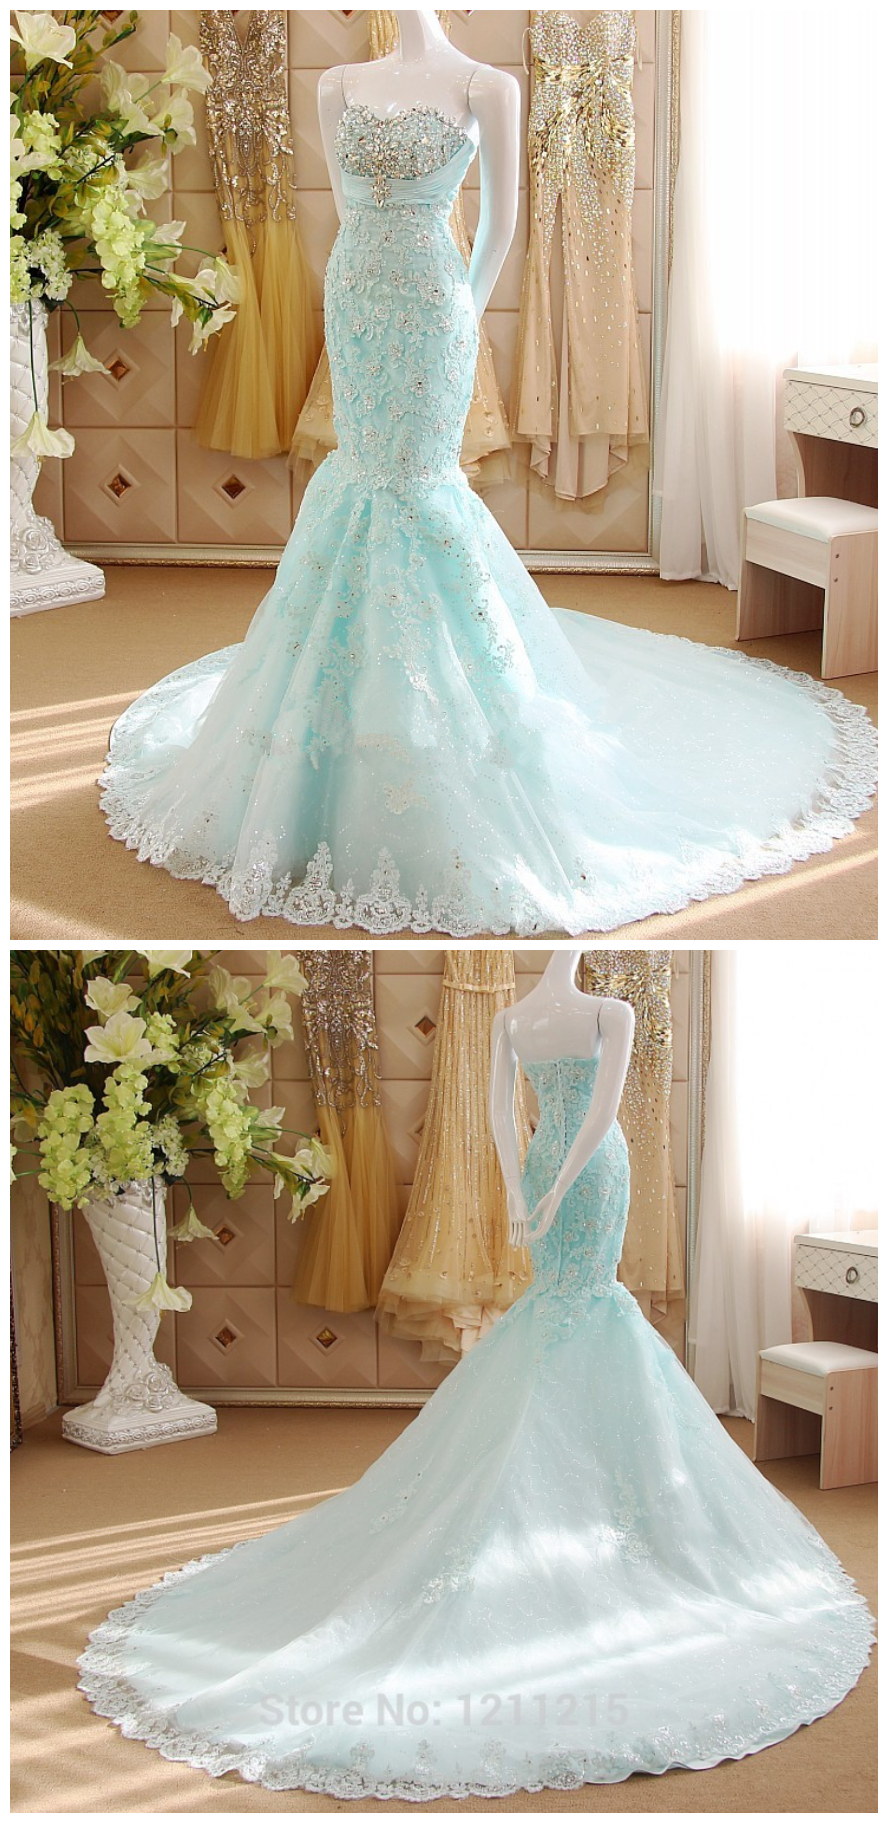 Lace Appliquéd And Beaded Embellished Floor Length Mermaid Prom Gown Featuring Sweetheart Bodice And Chapel Train